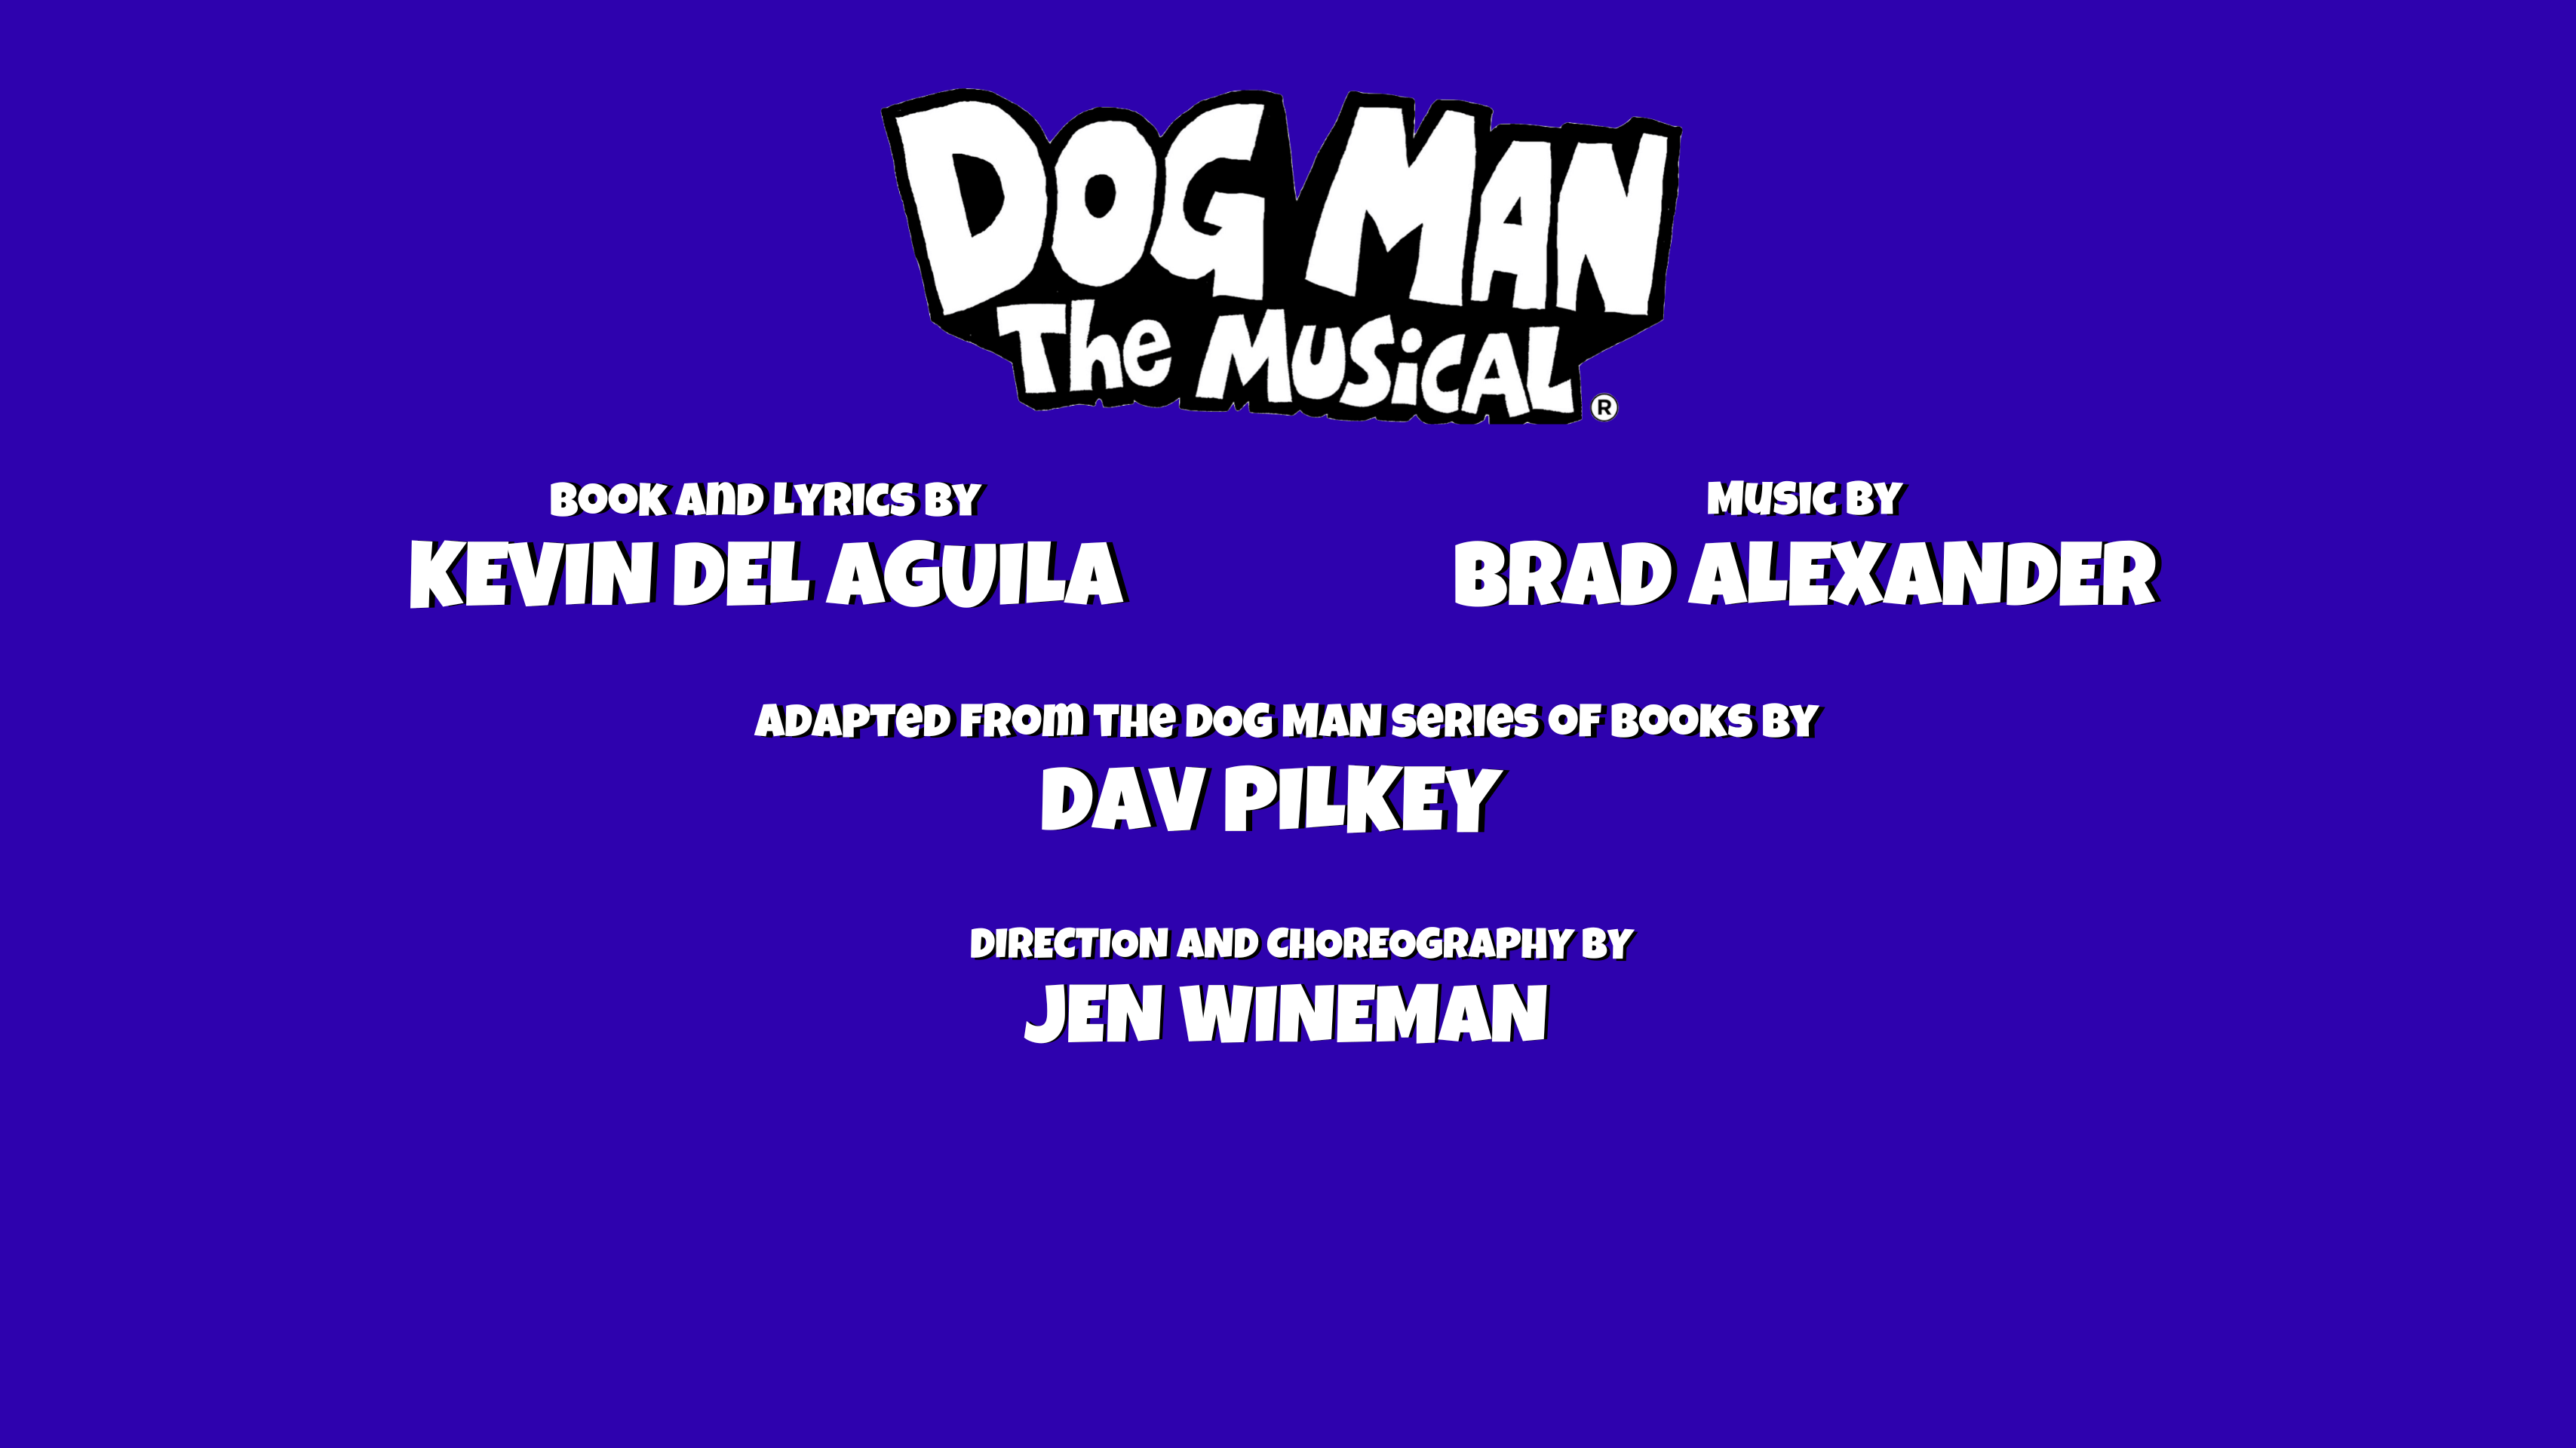 DOG MAN: THE MUSICAL Book & Lyrics by Kevin Del Aguila, Music by Brad Alexander, Adapted from the Dog Man series of books by David Pilkey, Direction and Choreography by Jen Wineman